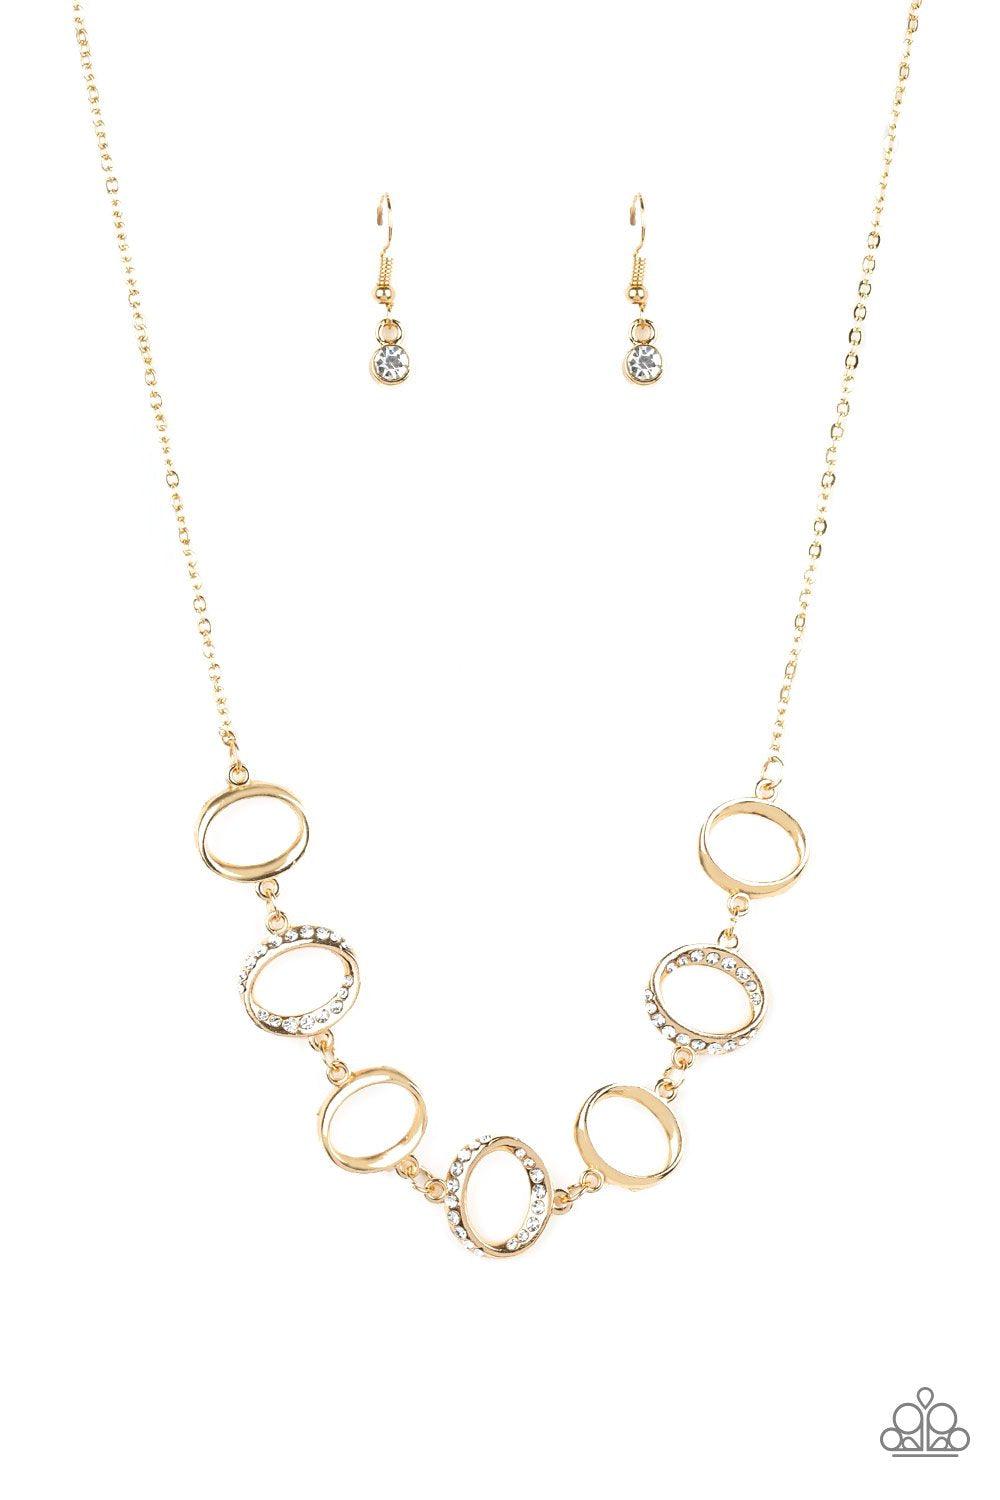 Inner Beauty Gold and White Rhinestone Necklace - Paparazzi Accessories-CarasShop.com - $5 Jewelry by Cara Jewels